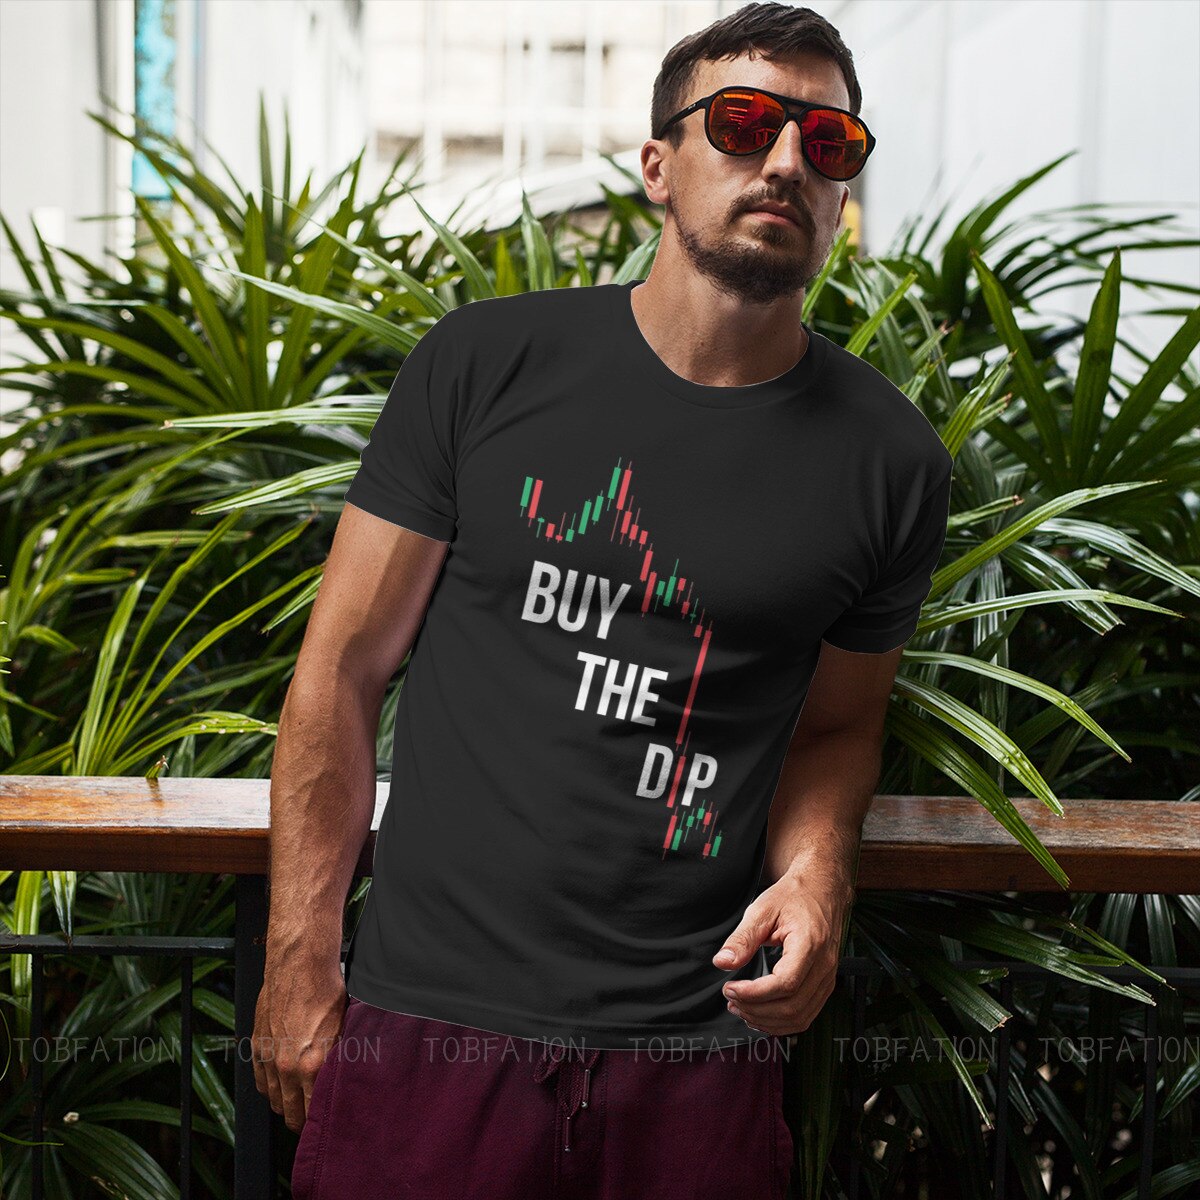 Cryptocurrencies “Buy The Dip” Themed Premium T-Shirts (15+ Designs) T-Shirts & Tank Tops